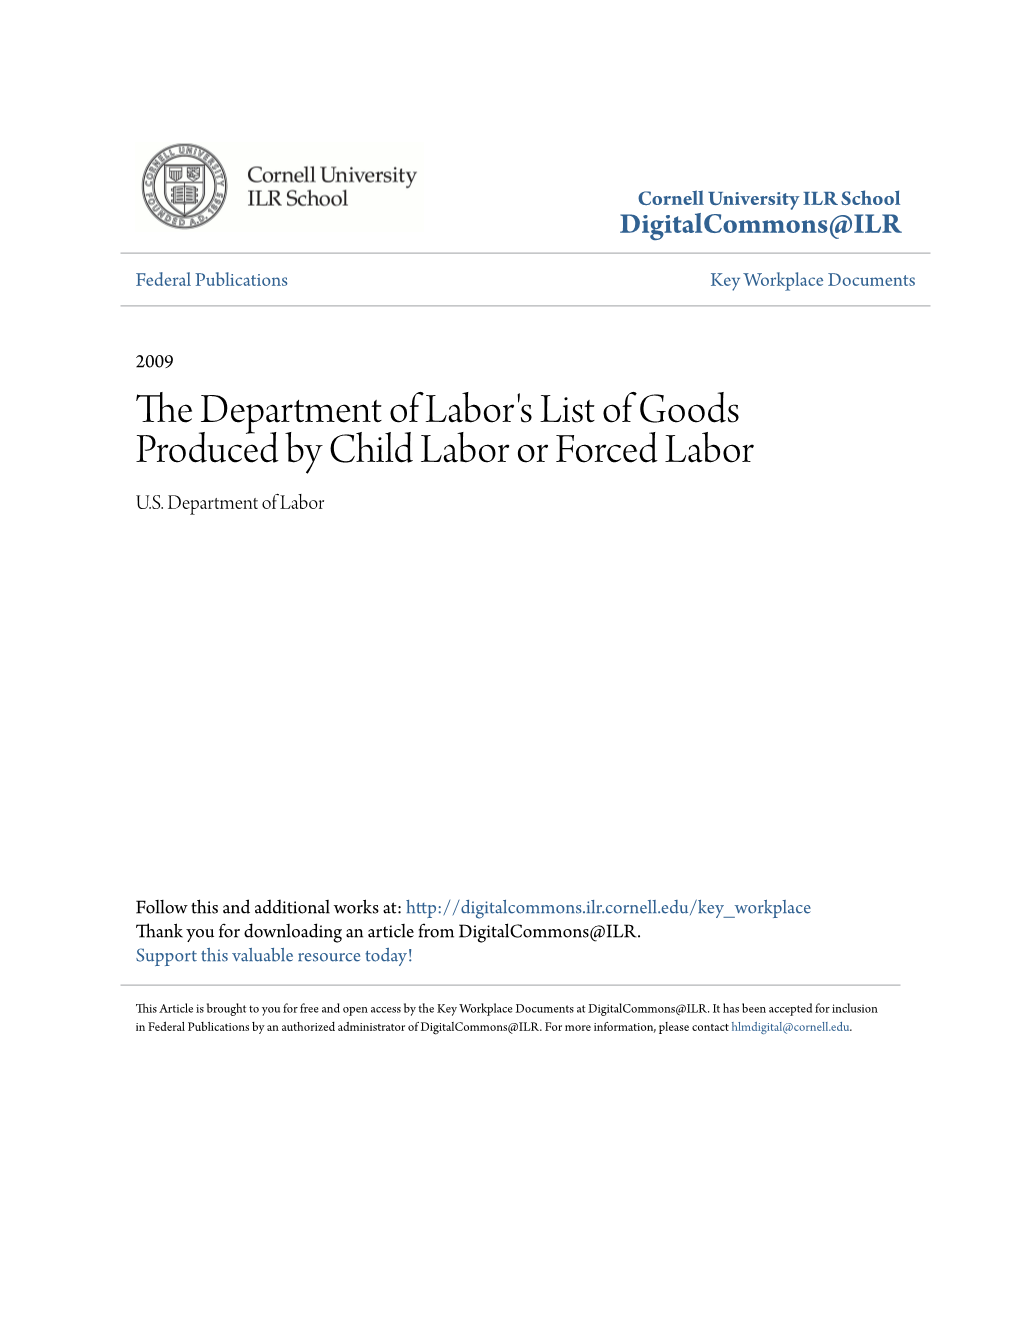 The Department of Labor's List of Goods Produced by Child Labor Or Forced Labor